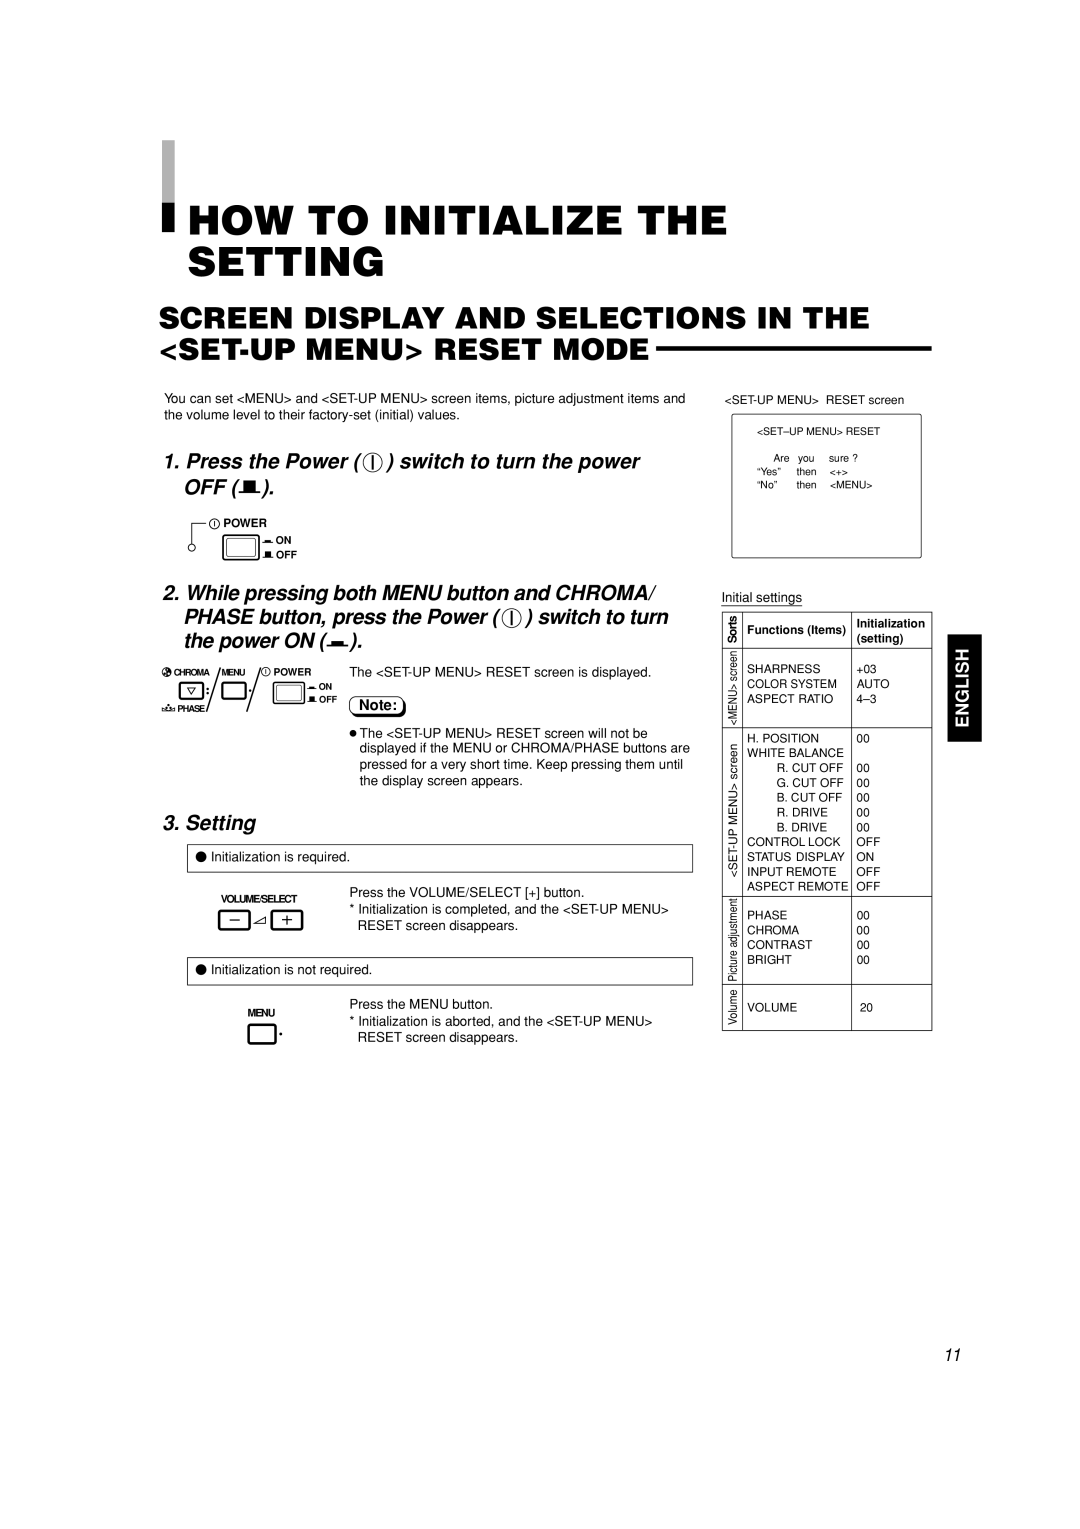 JVC TM-A101G manual How To Initialize The Setting, Screen Display And Selections In The Set-Up Menu Reset Mode, English 